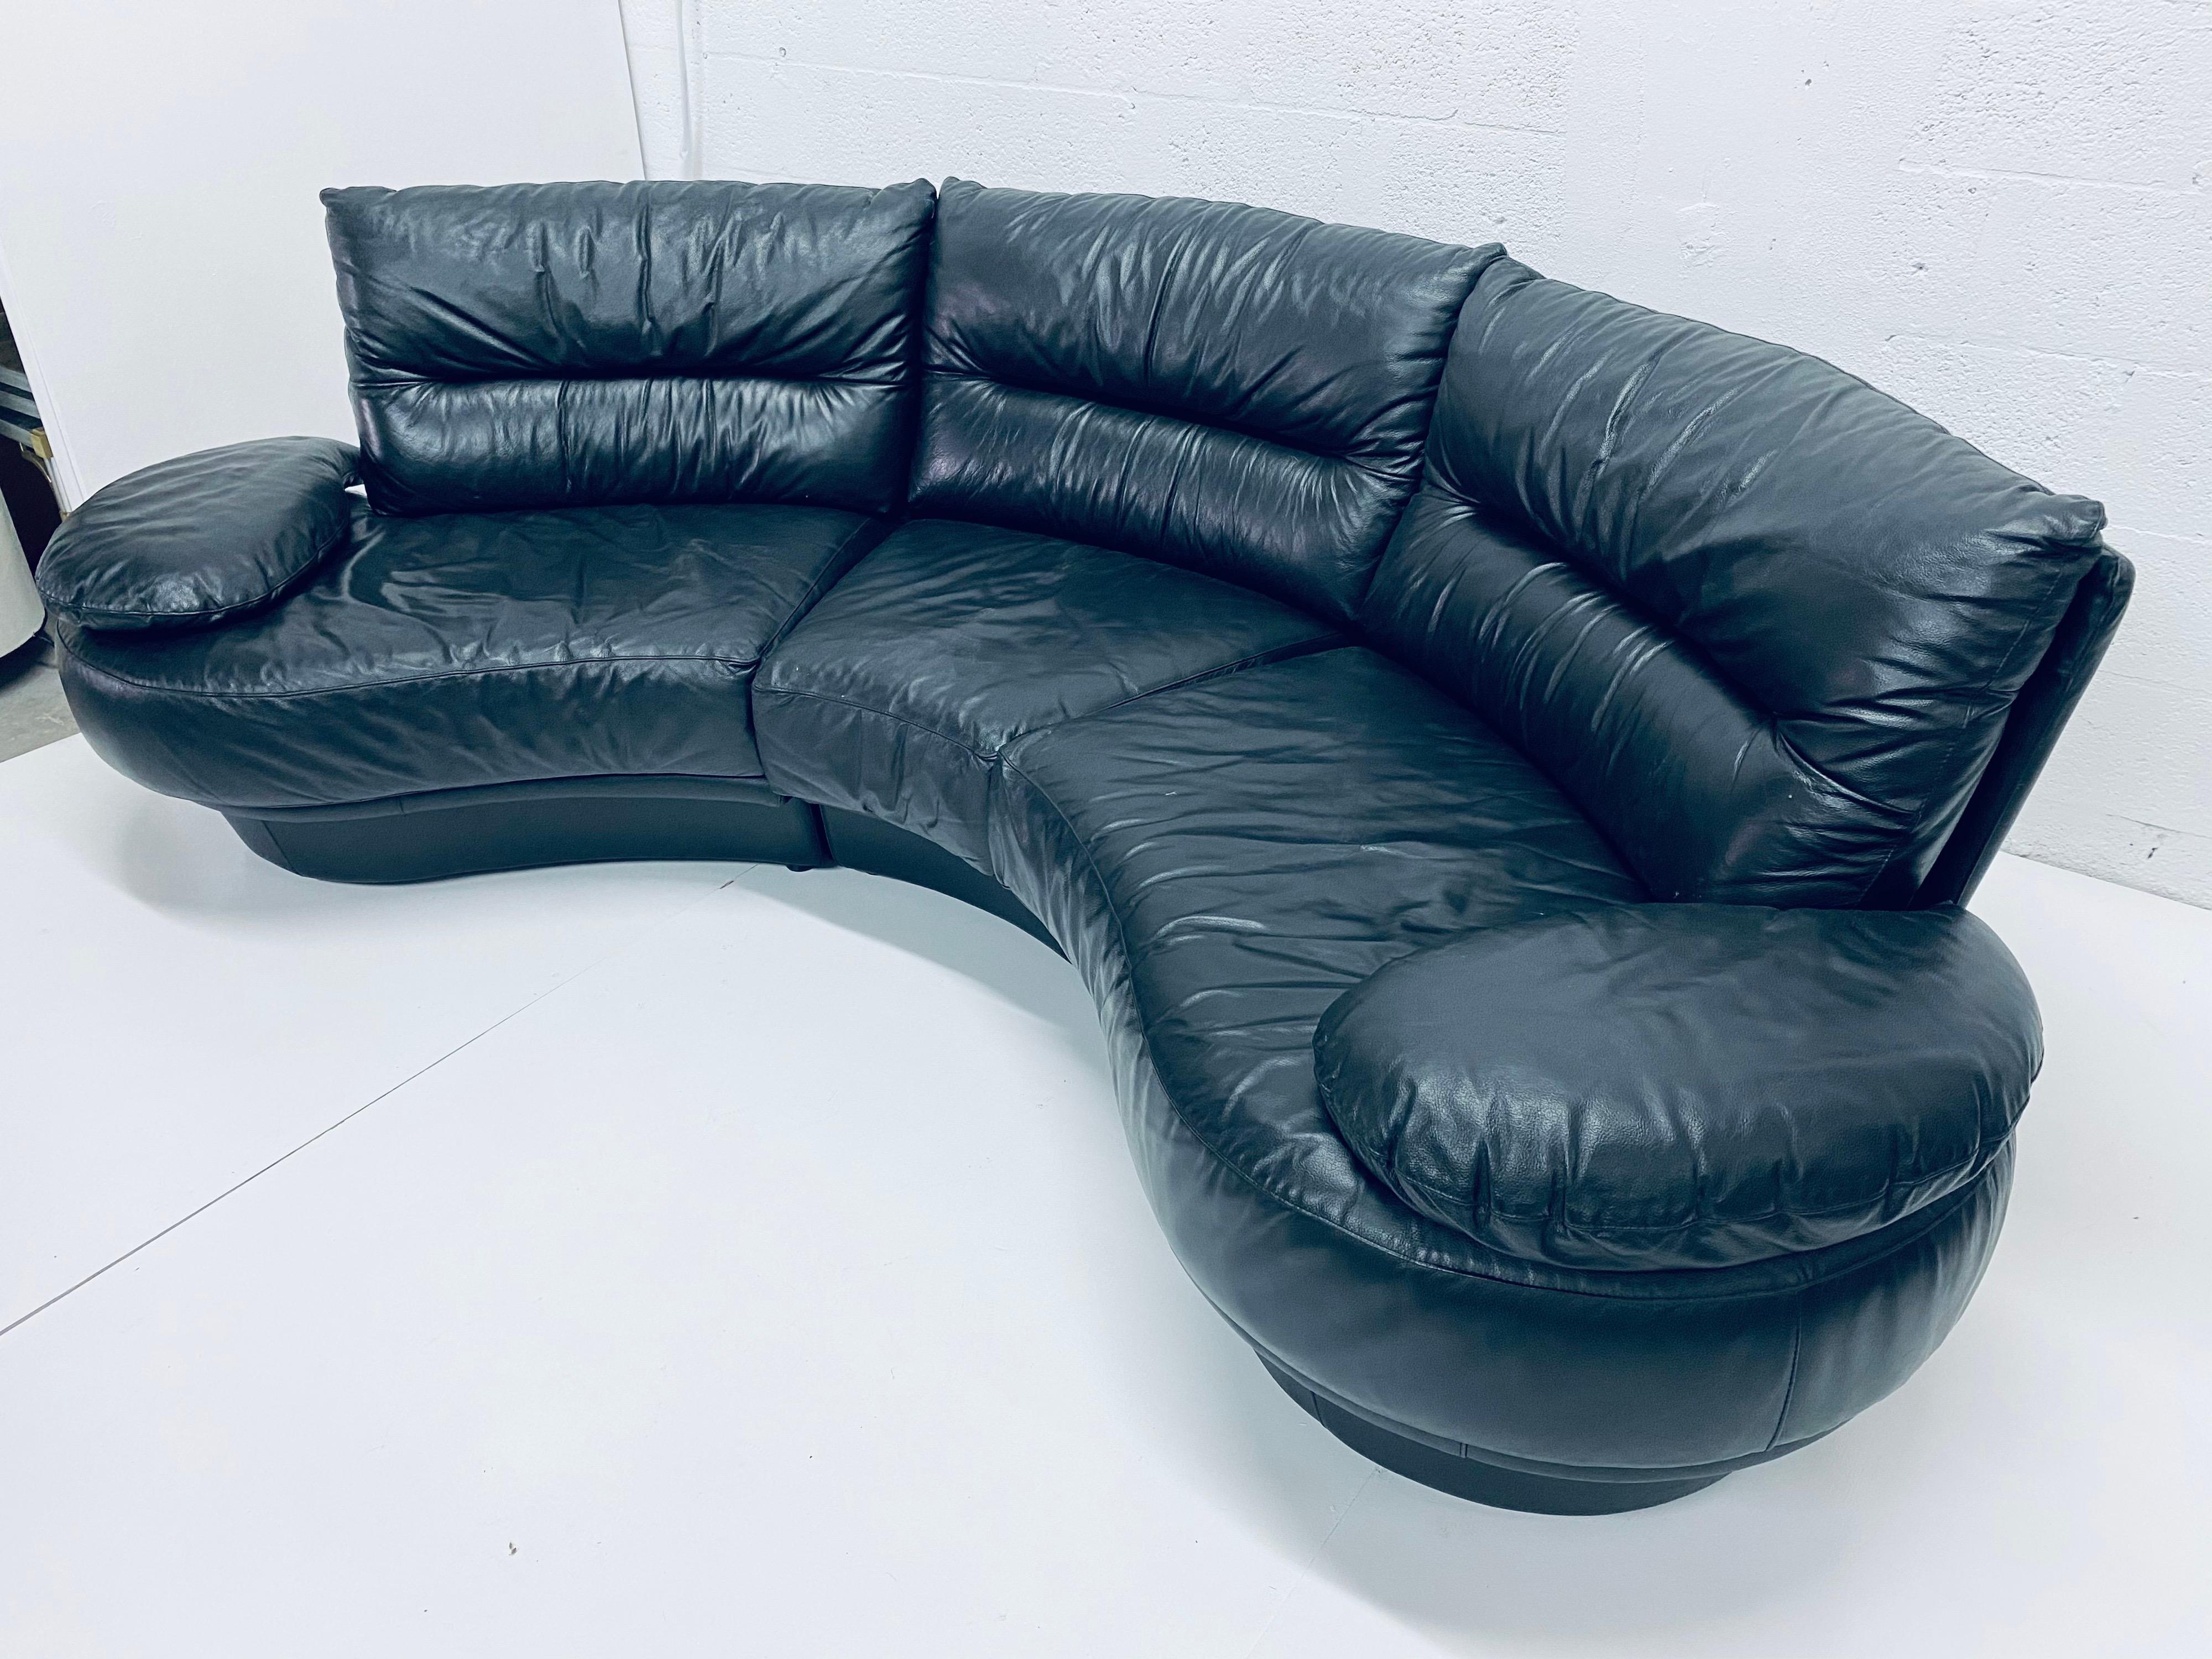 Black leather sectional sofa by Wilma Salotti and made in Italy, circa 1980s.